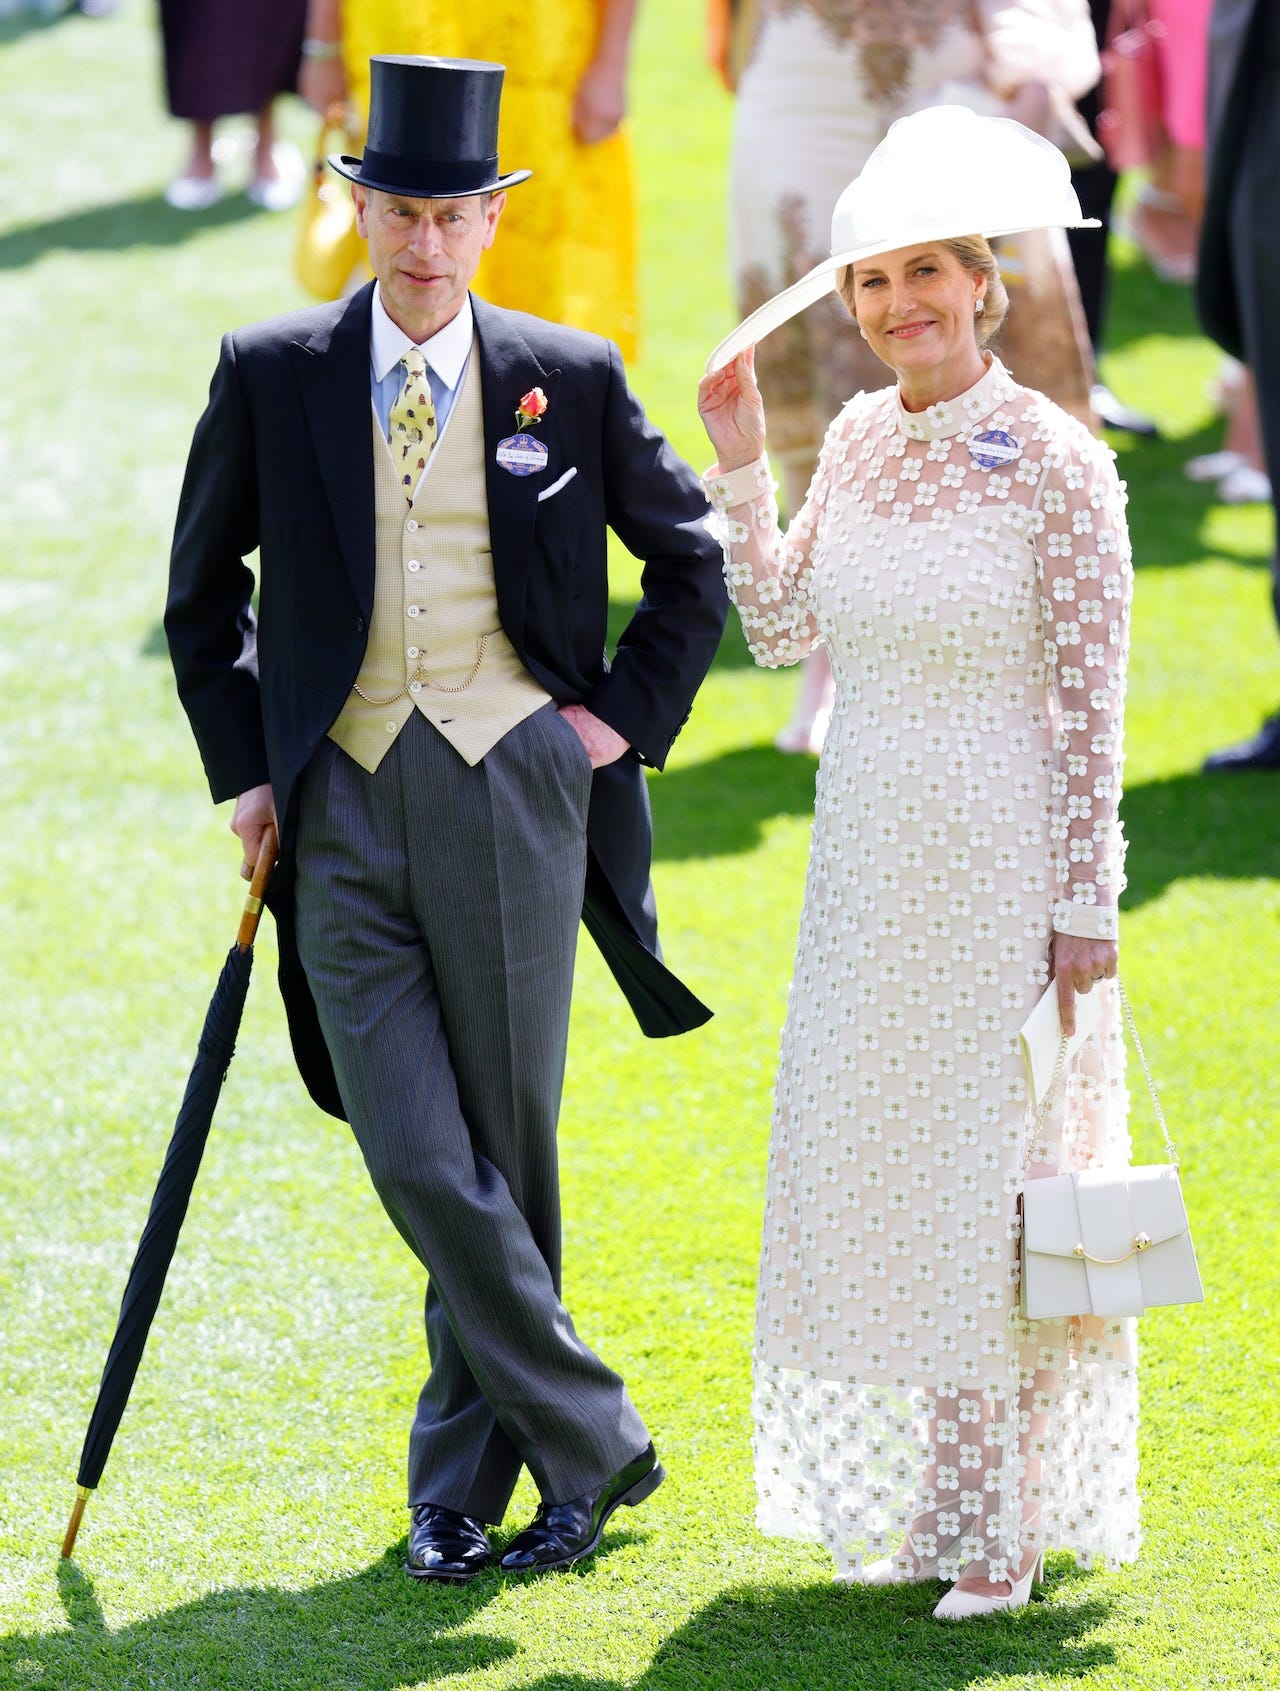 <p>Edward, 60, kept to the dress code, pairing a black morning suit jacket with a collared shirt, a light-yellow waistcoat, and a black tie. He did add a pop of individuality to his look with a bright-yellow tie.</p><p>The prince was accompanied by his wife, Sophie, 59, who wore an ivory dress designed by <a href="https://www.suzannah.com/en-us/products/keres-dress-ivory">Suzannah London</a>. The "Keres" dress, which retails at $4,950, features a sheer tulle layer covered in mini daisies over a simple crepe dress. The Duchess of Edinburgh paired it with a wide-brimmed white hat and a coordinating handbag.</p>